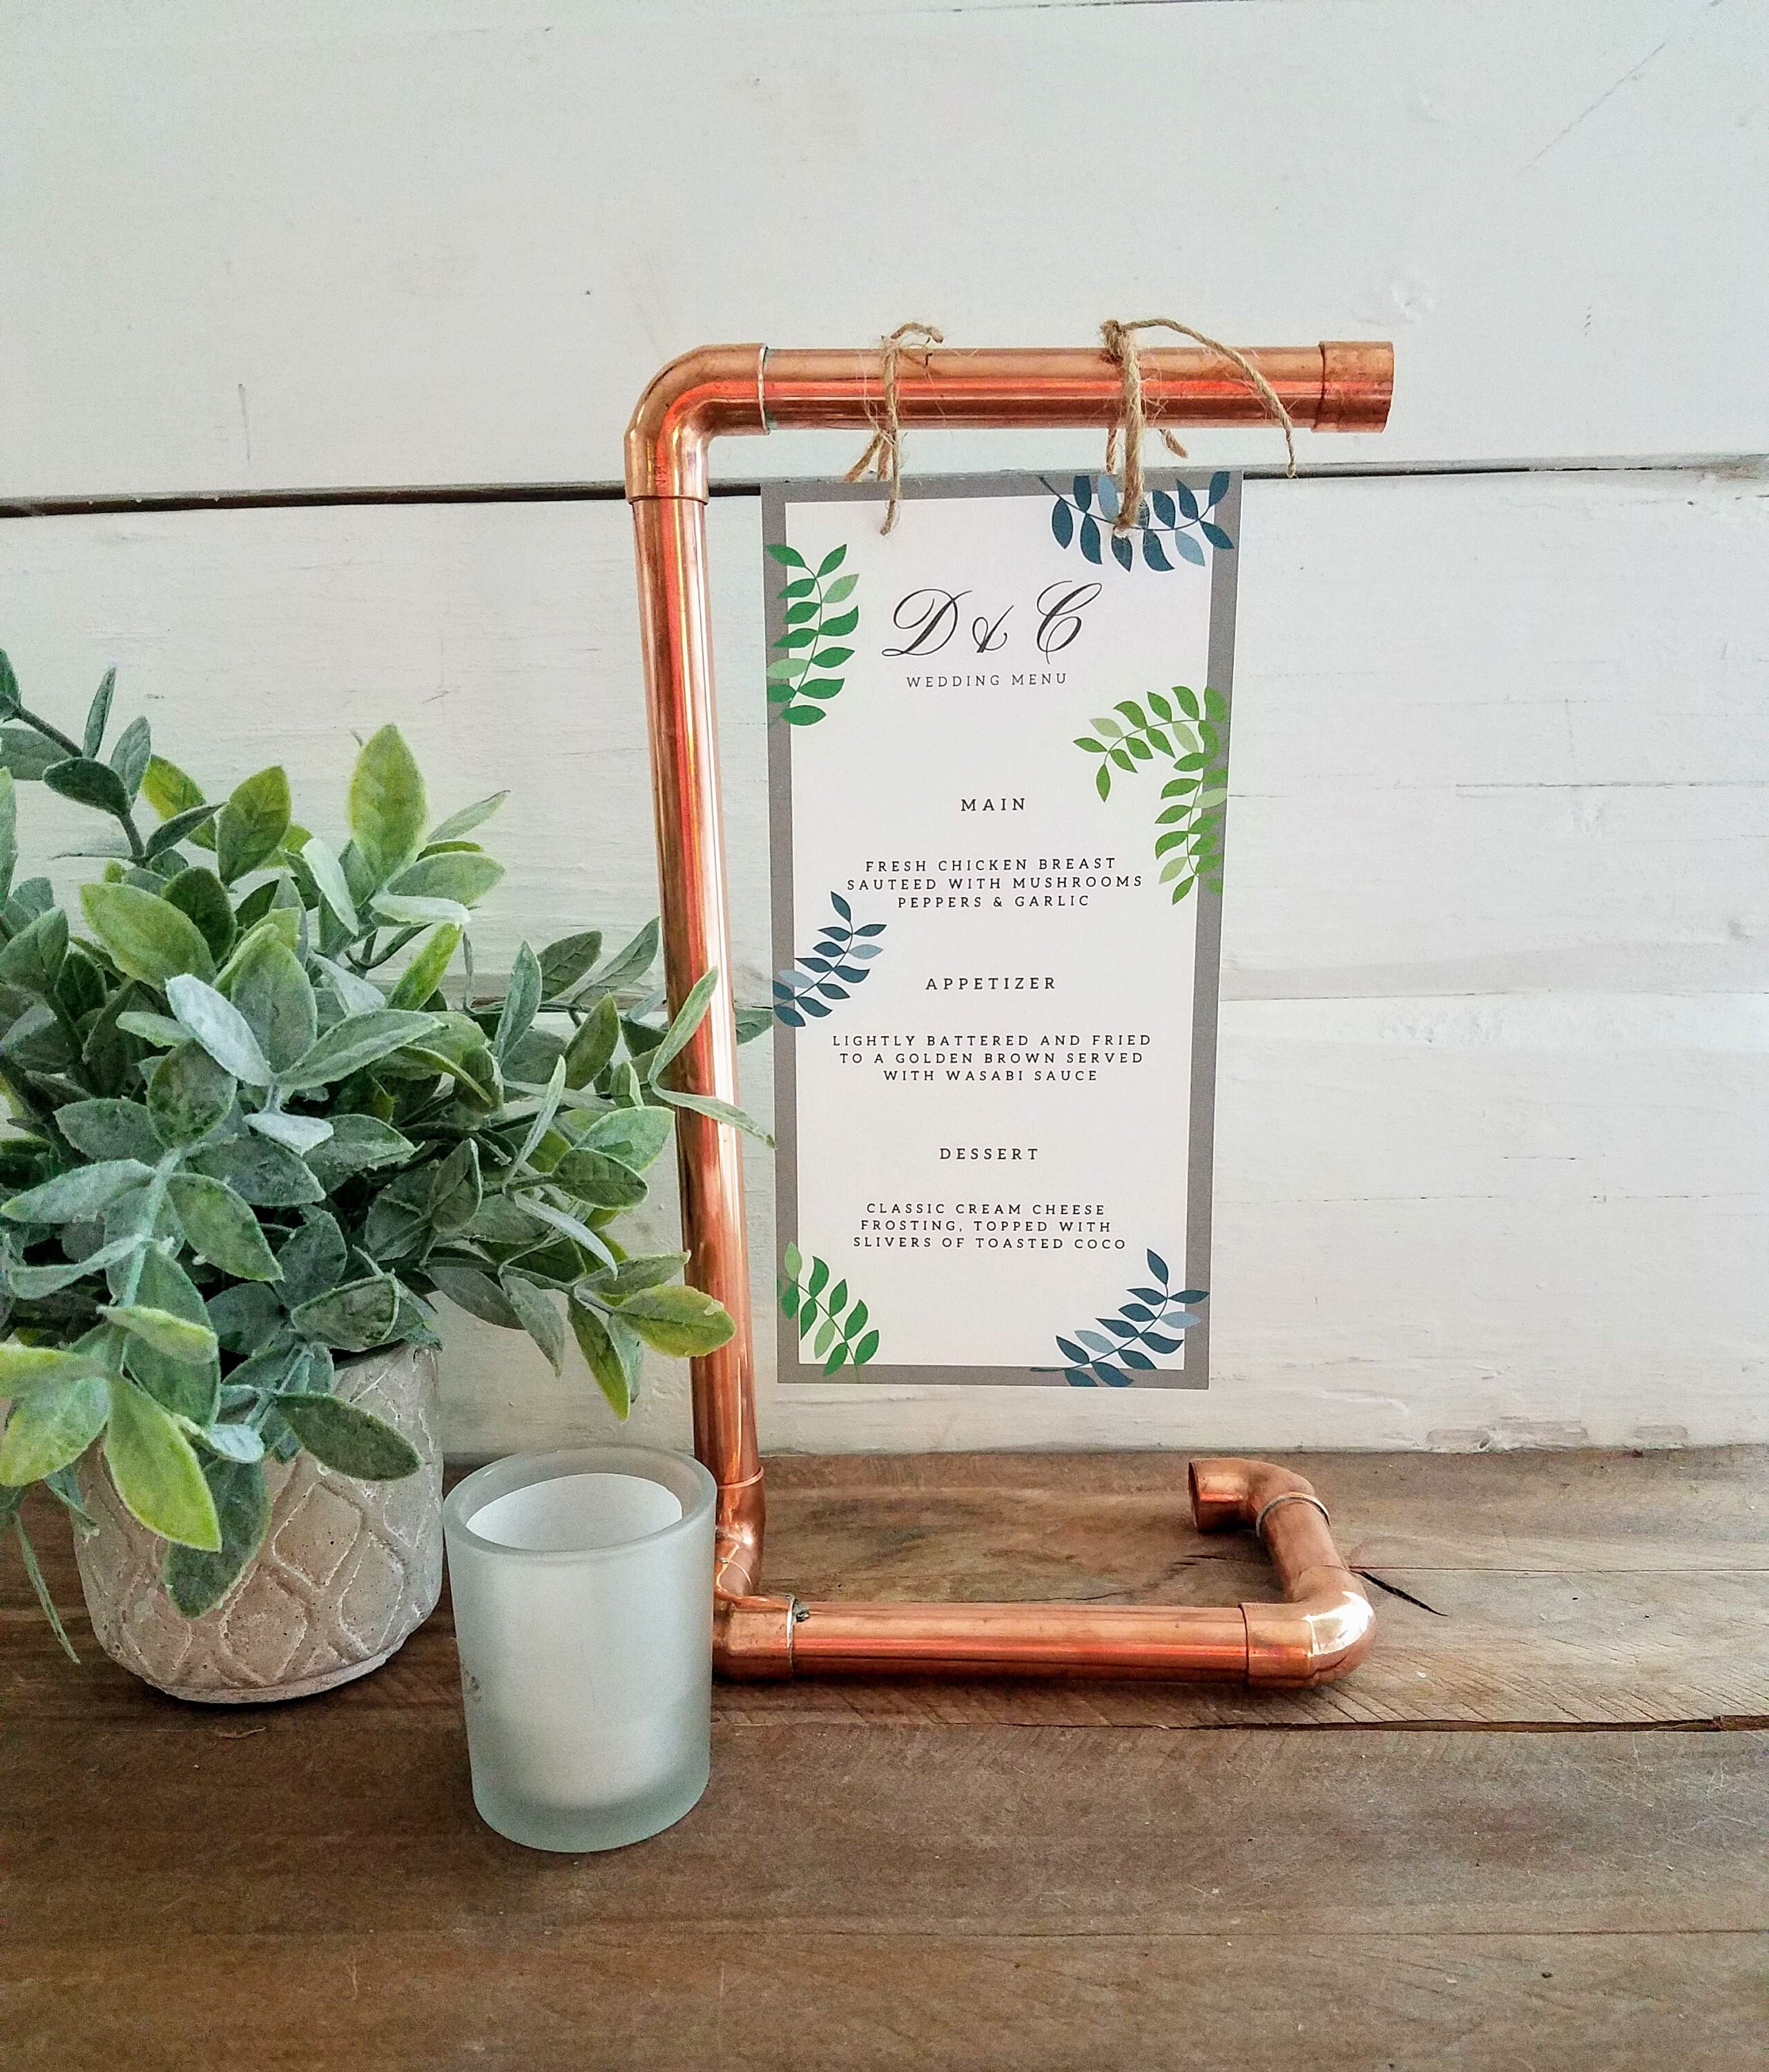 Copper Wedding Sign Stands and Easels reception Welcome Sign